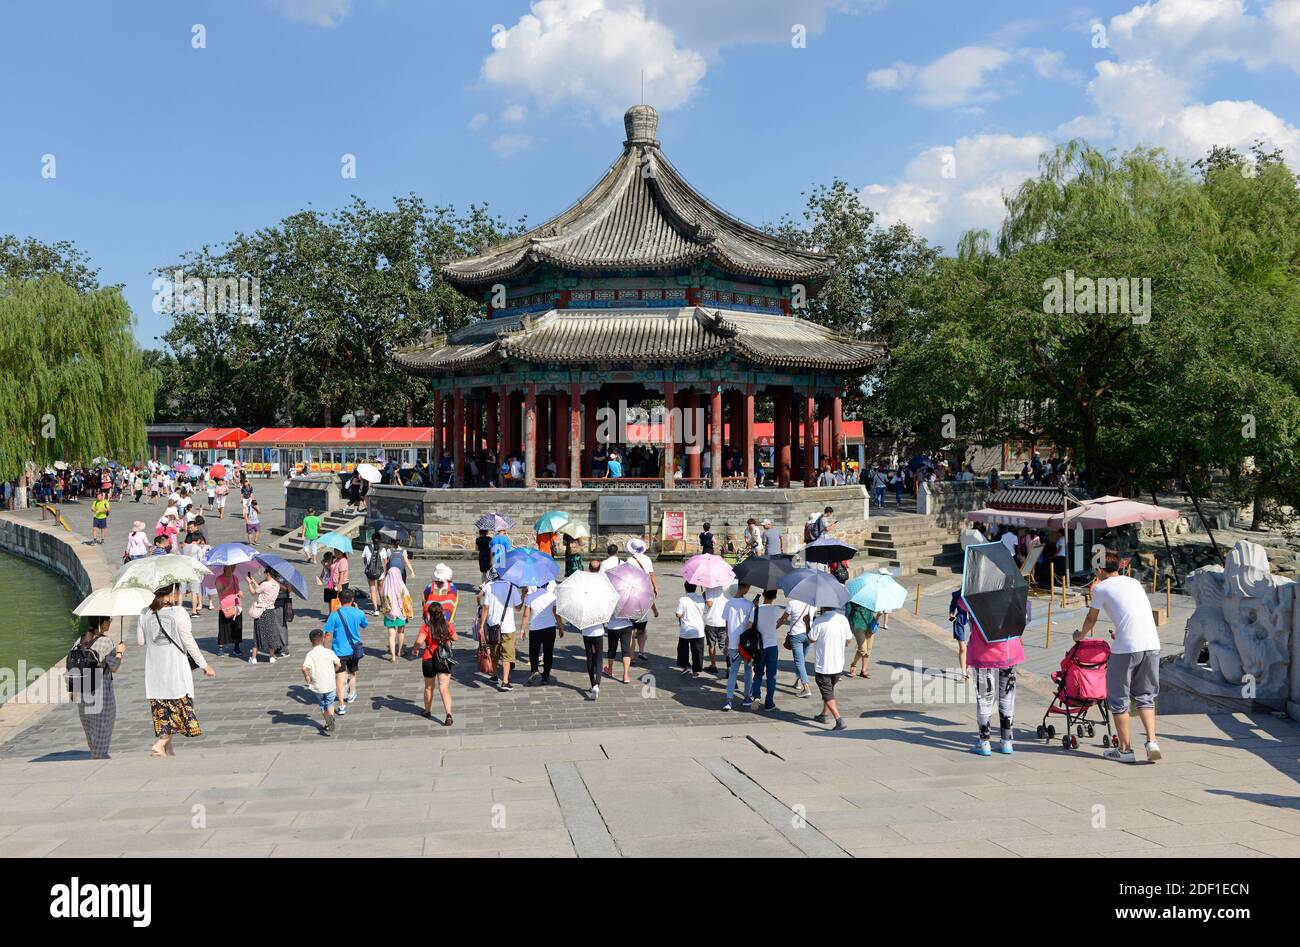 Many visitors at the Kuoru pavilion at the eastern end of the seventeen arch bridge in the Summer Palace compound in Beijing, China Stock Photo